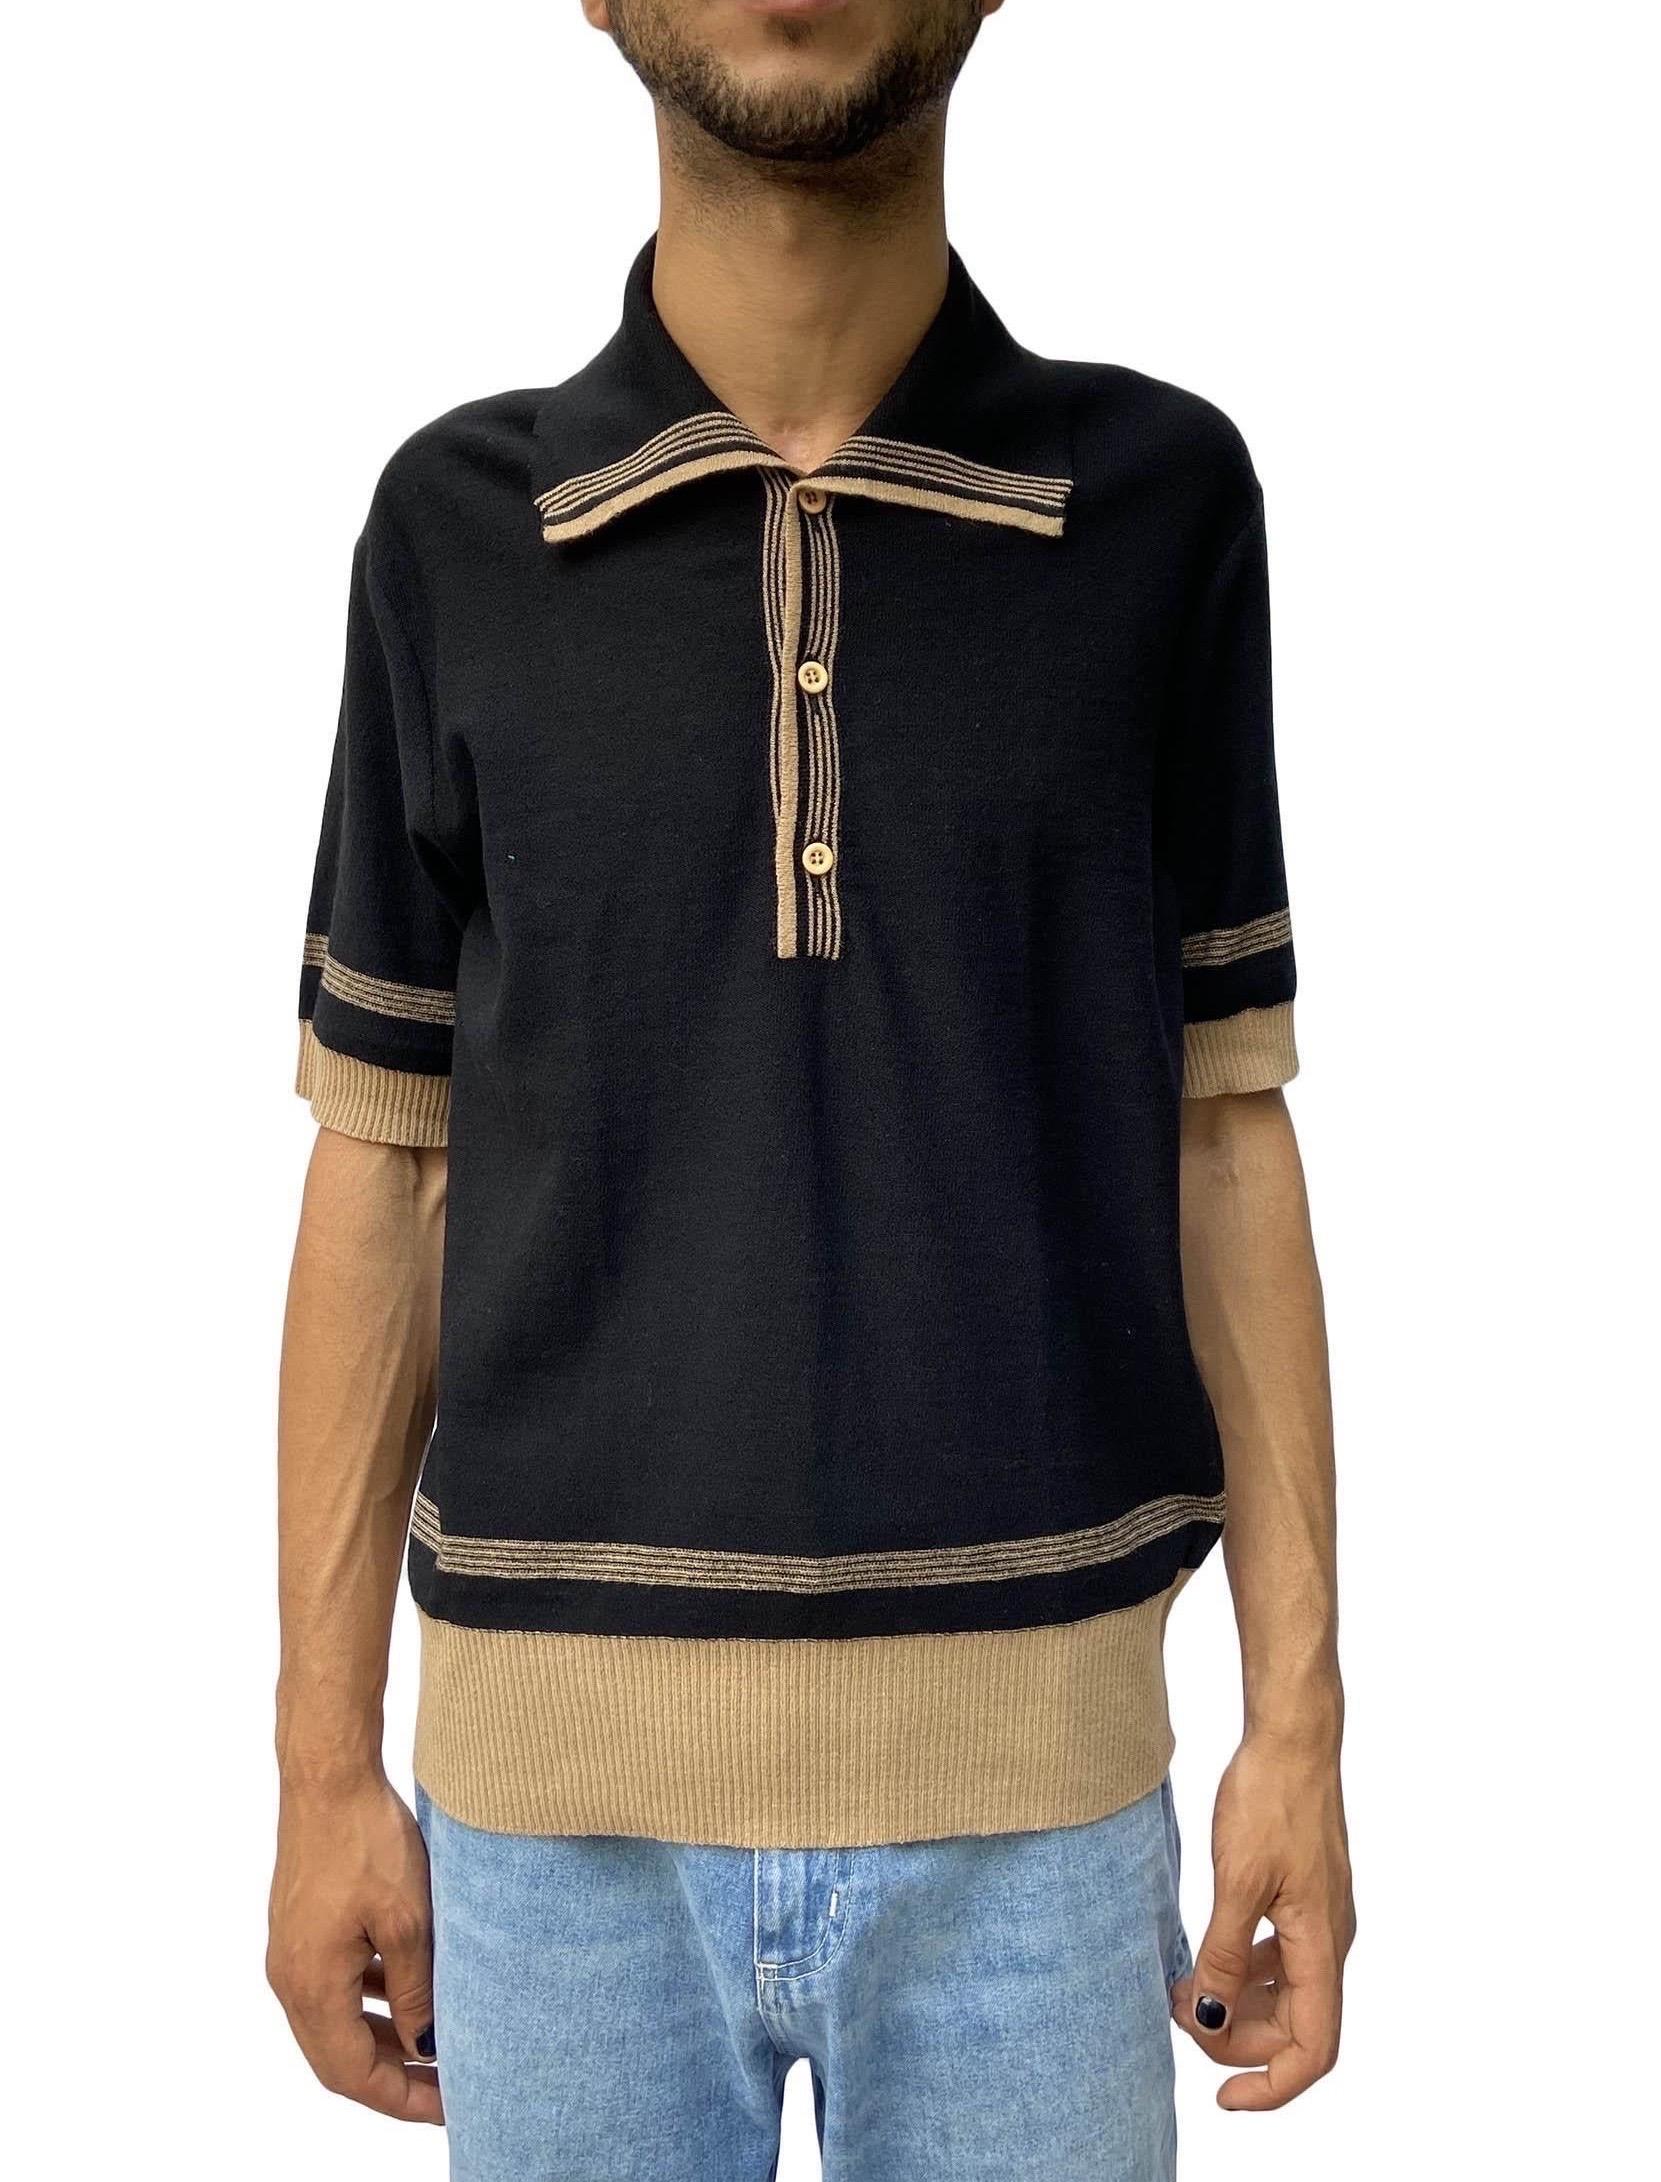 1970S BALMAIN Black & Brown Cotton Knit Mens Rat Pack Nautical Polo Shirt In Excellent Condition For Sale In New York, NY